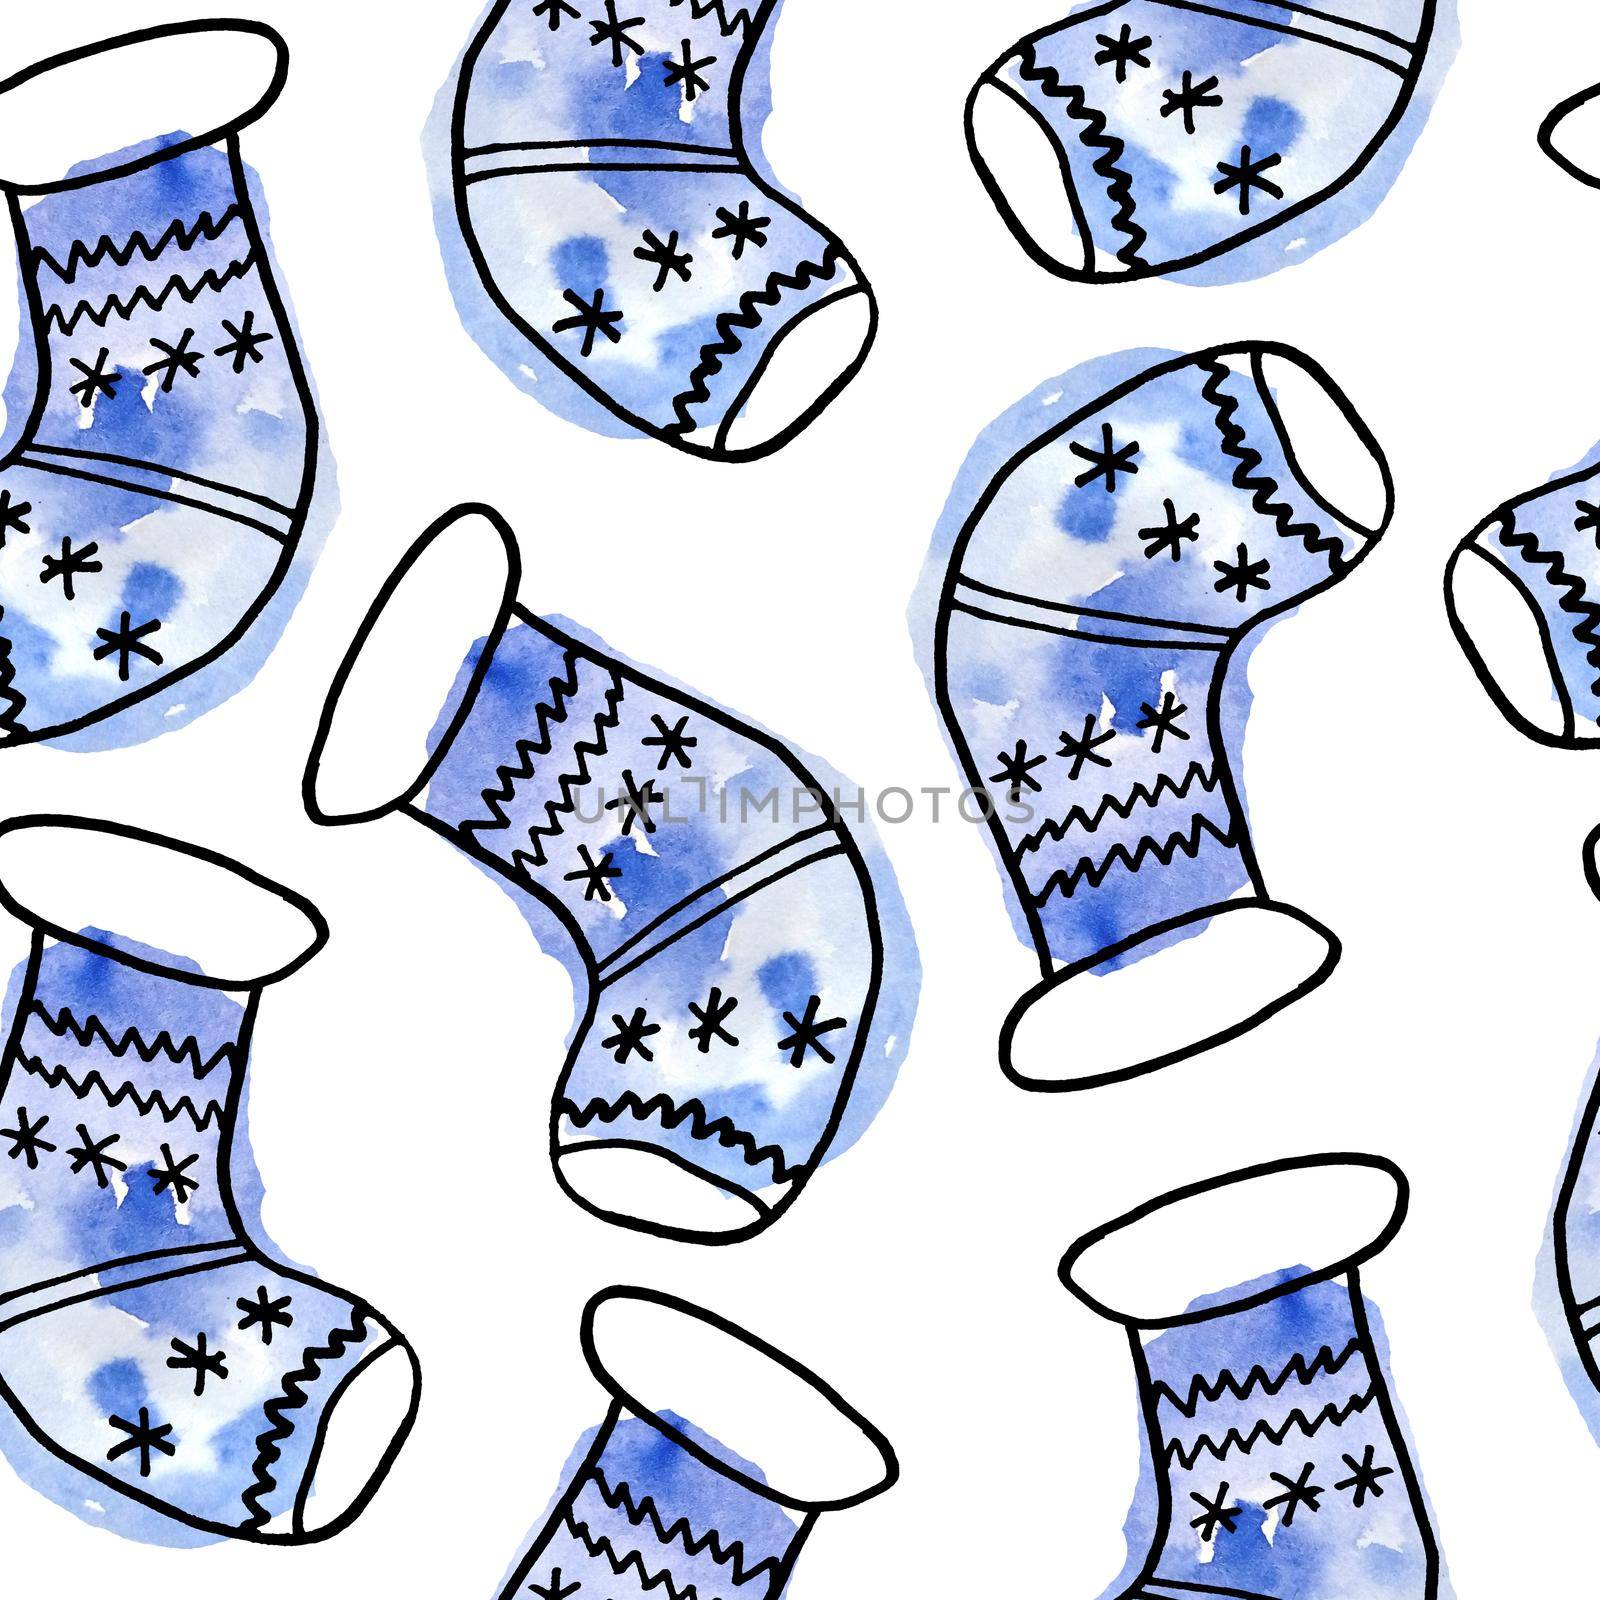 Watercolor seamless hand drawn pattern with Christmas New Year ornaments socks blue turquoise on white background. Black doodle lines trendy modern cartoon style contemporary winter december design. by Lagmar